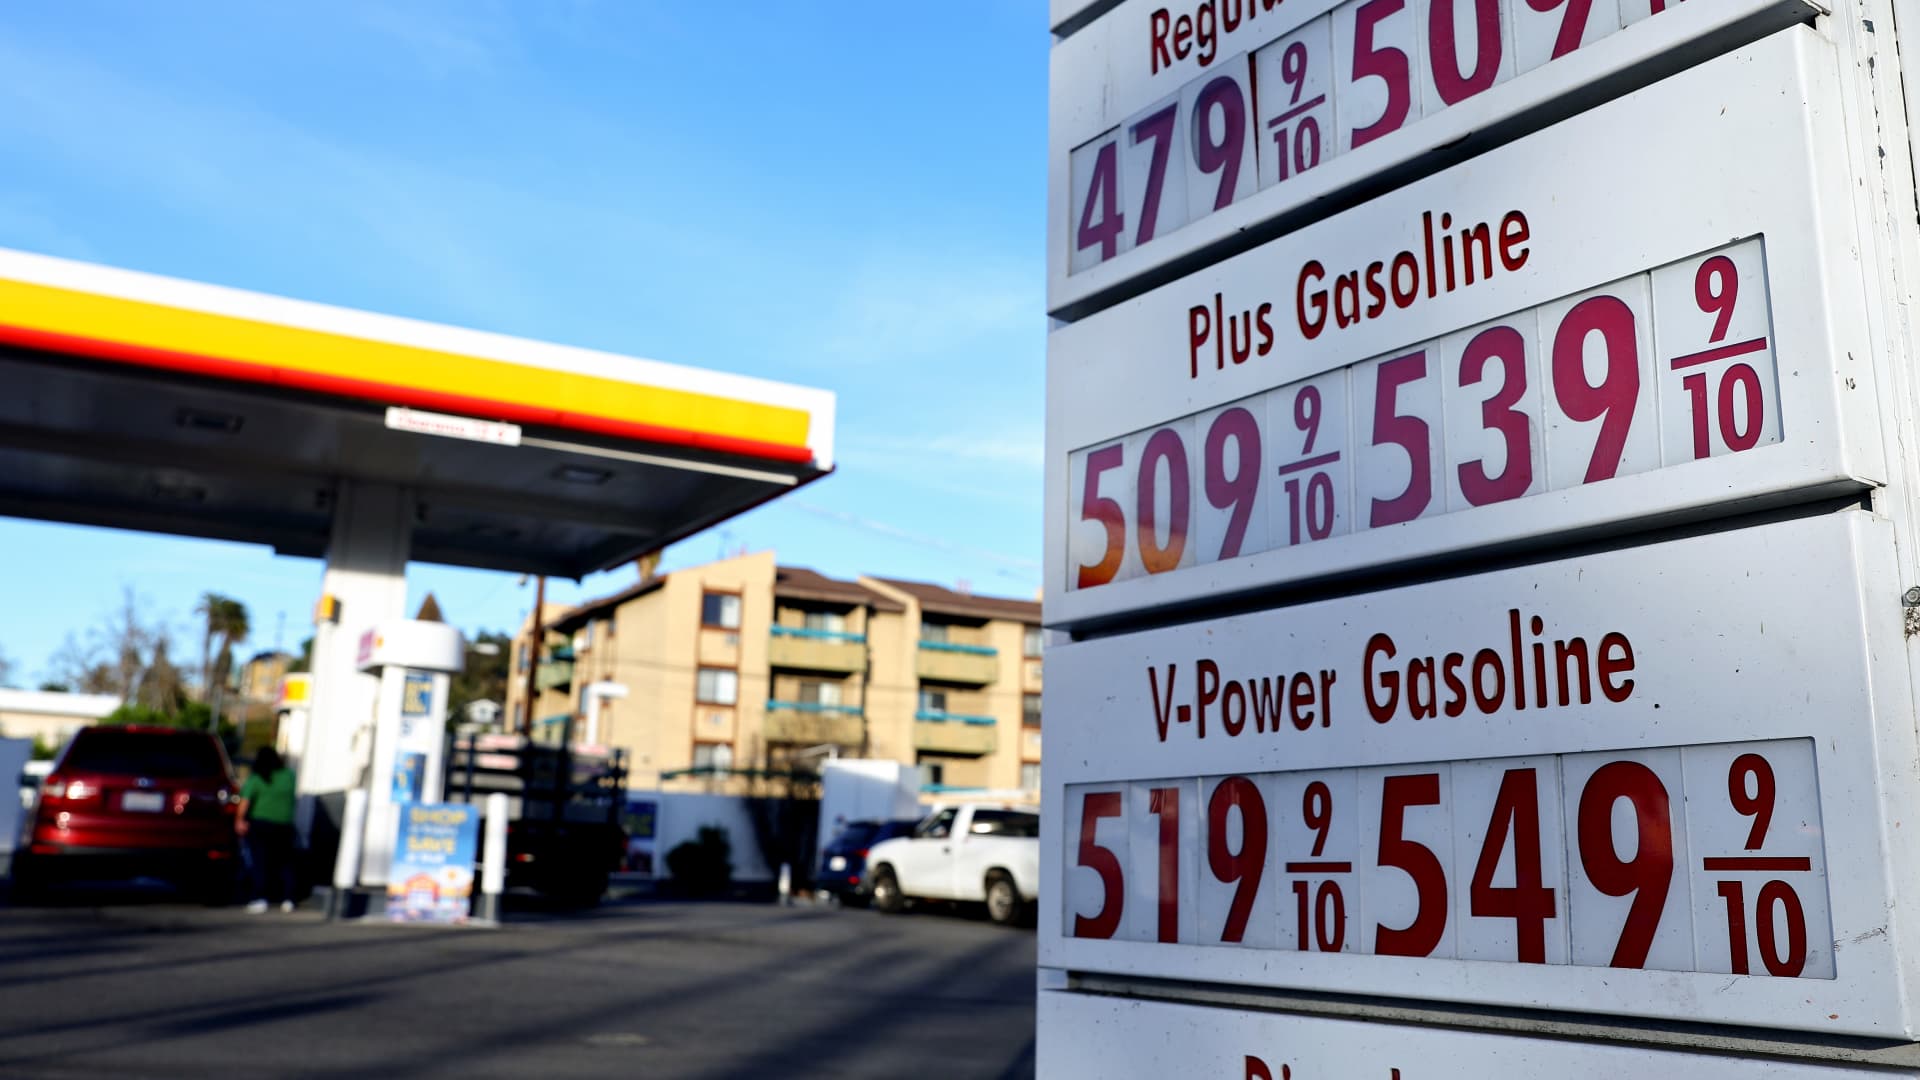 Gasoline prices are displayed at a Los Angeles gas station on Feb. 8, 2022.